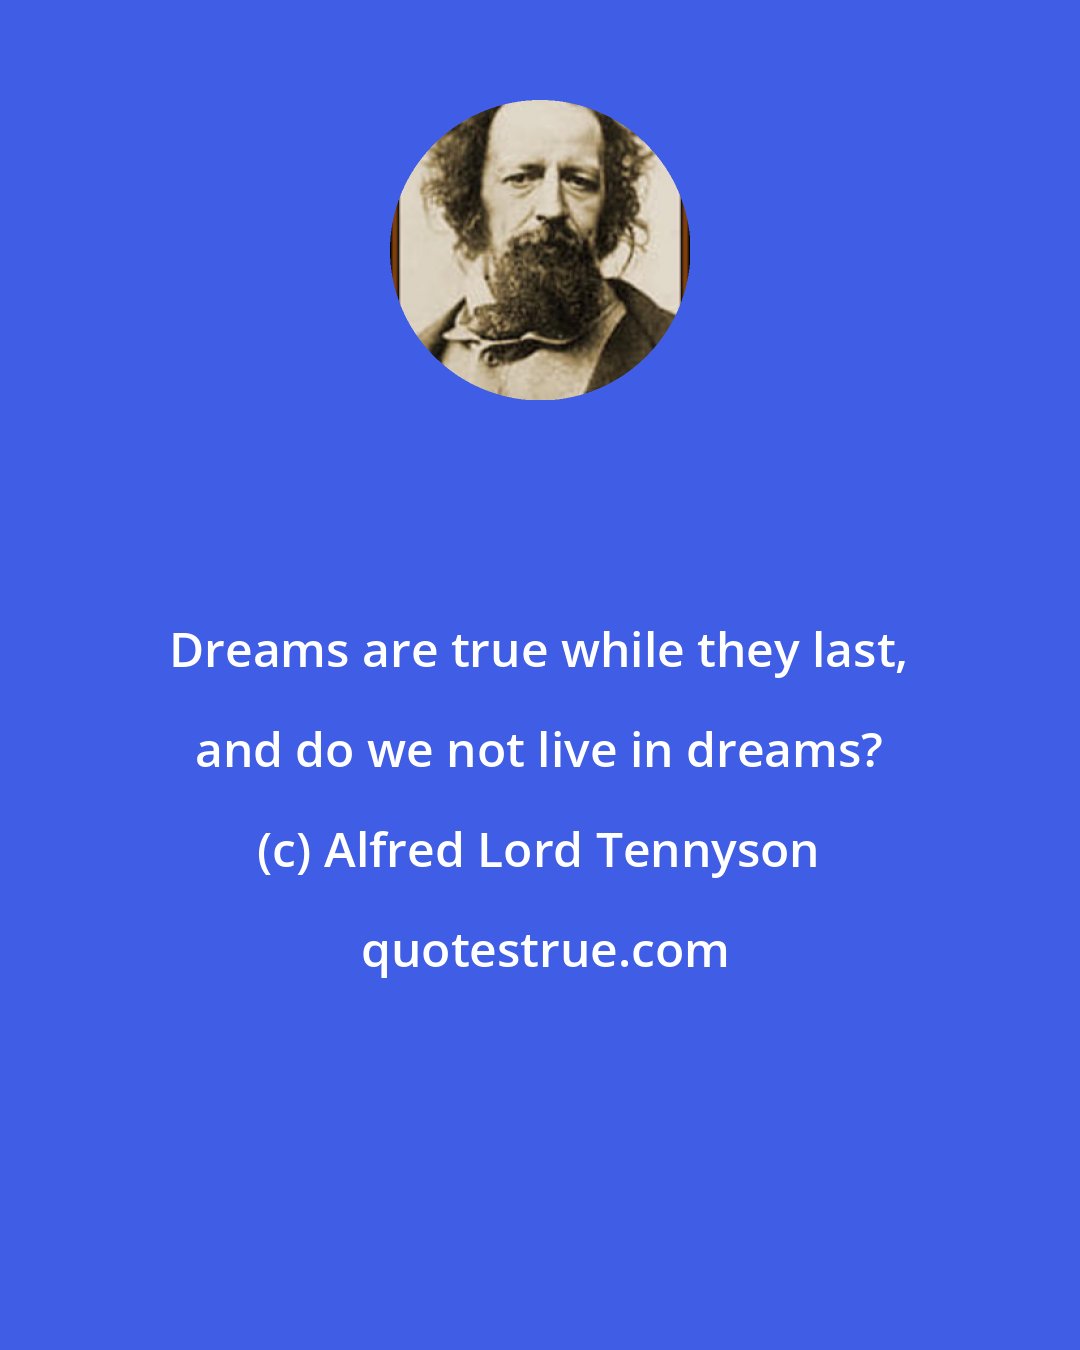 Alfred Lord Tennyson: Dreams are true while they last, and do we not live in dreams?